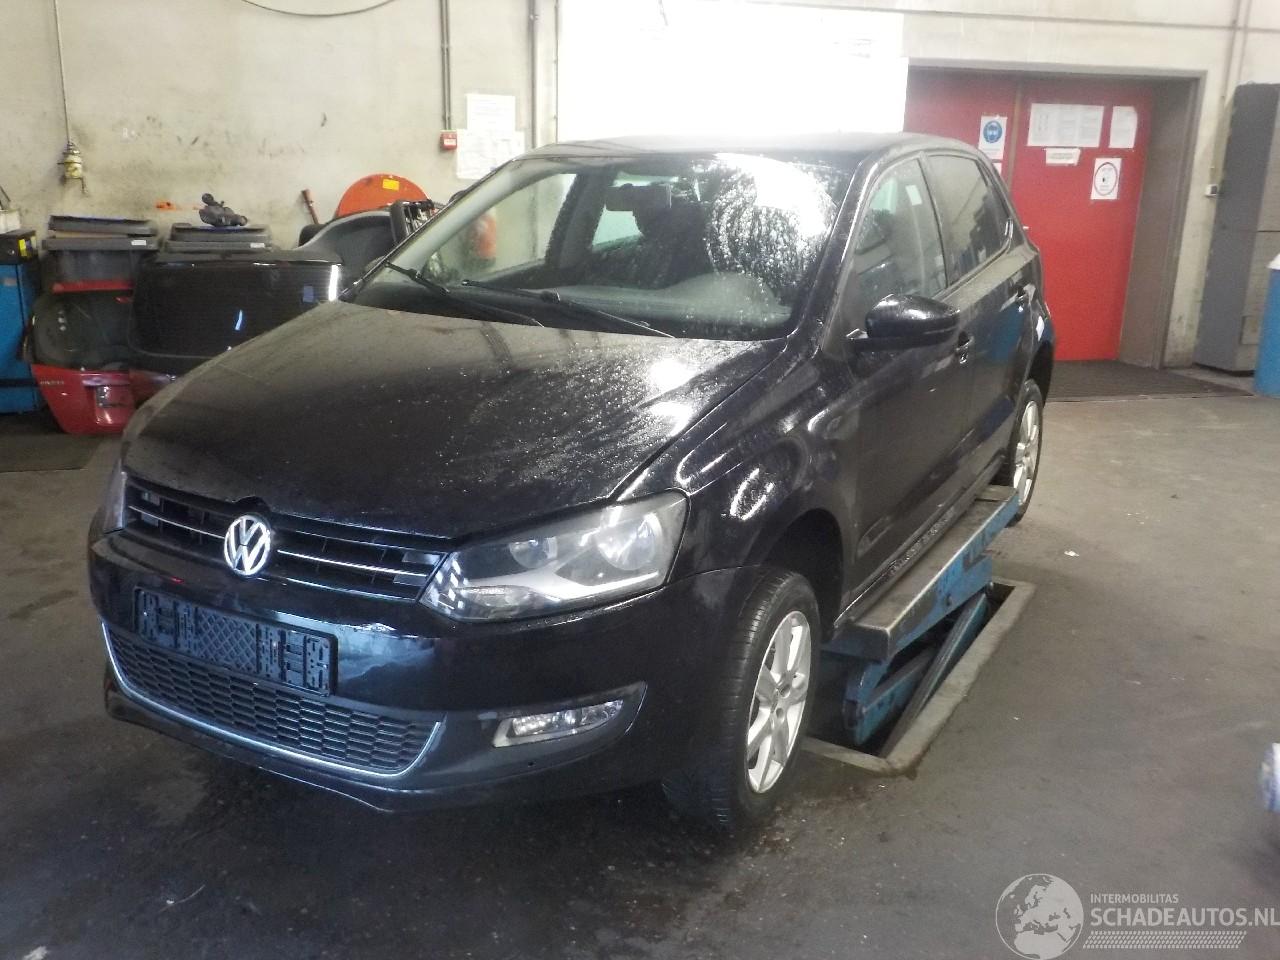 Volkswagen Polo Polo (6R) Hatchback 1.6 TDI 16V 105 (CAYC(Euro 5)) [77kW]  (06-2009/05=
-2014)